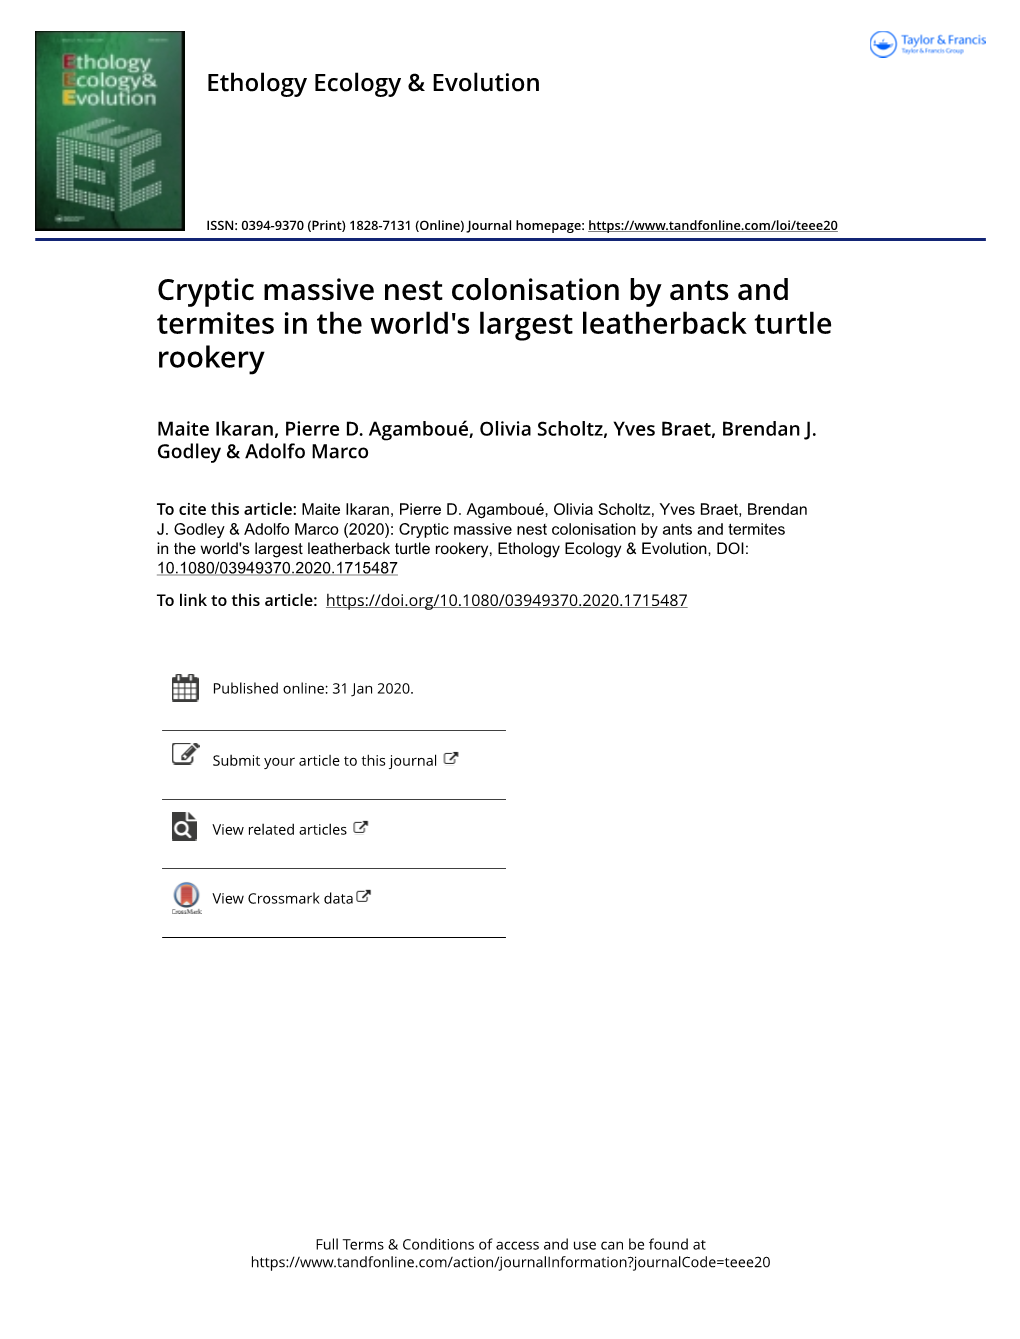 Cryptic Massive Nest Colonisation by Ants and Termites in the World's Largest Leatherback Turtle Rookery